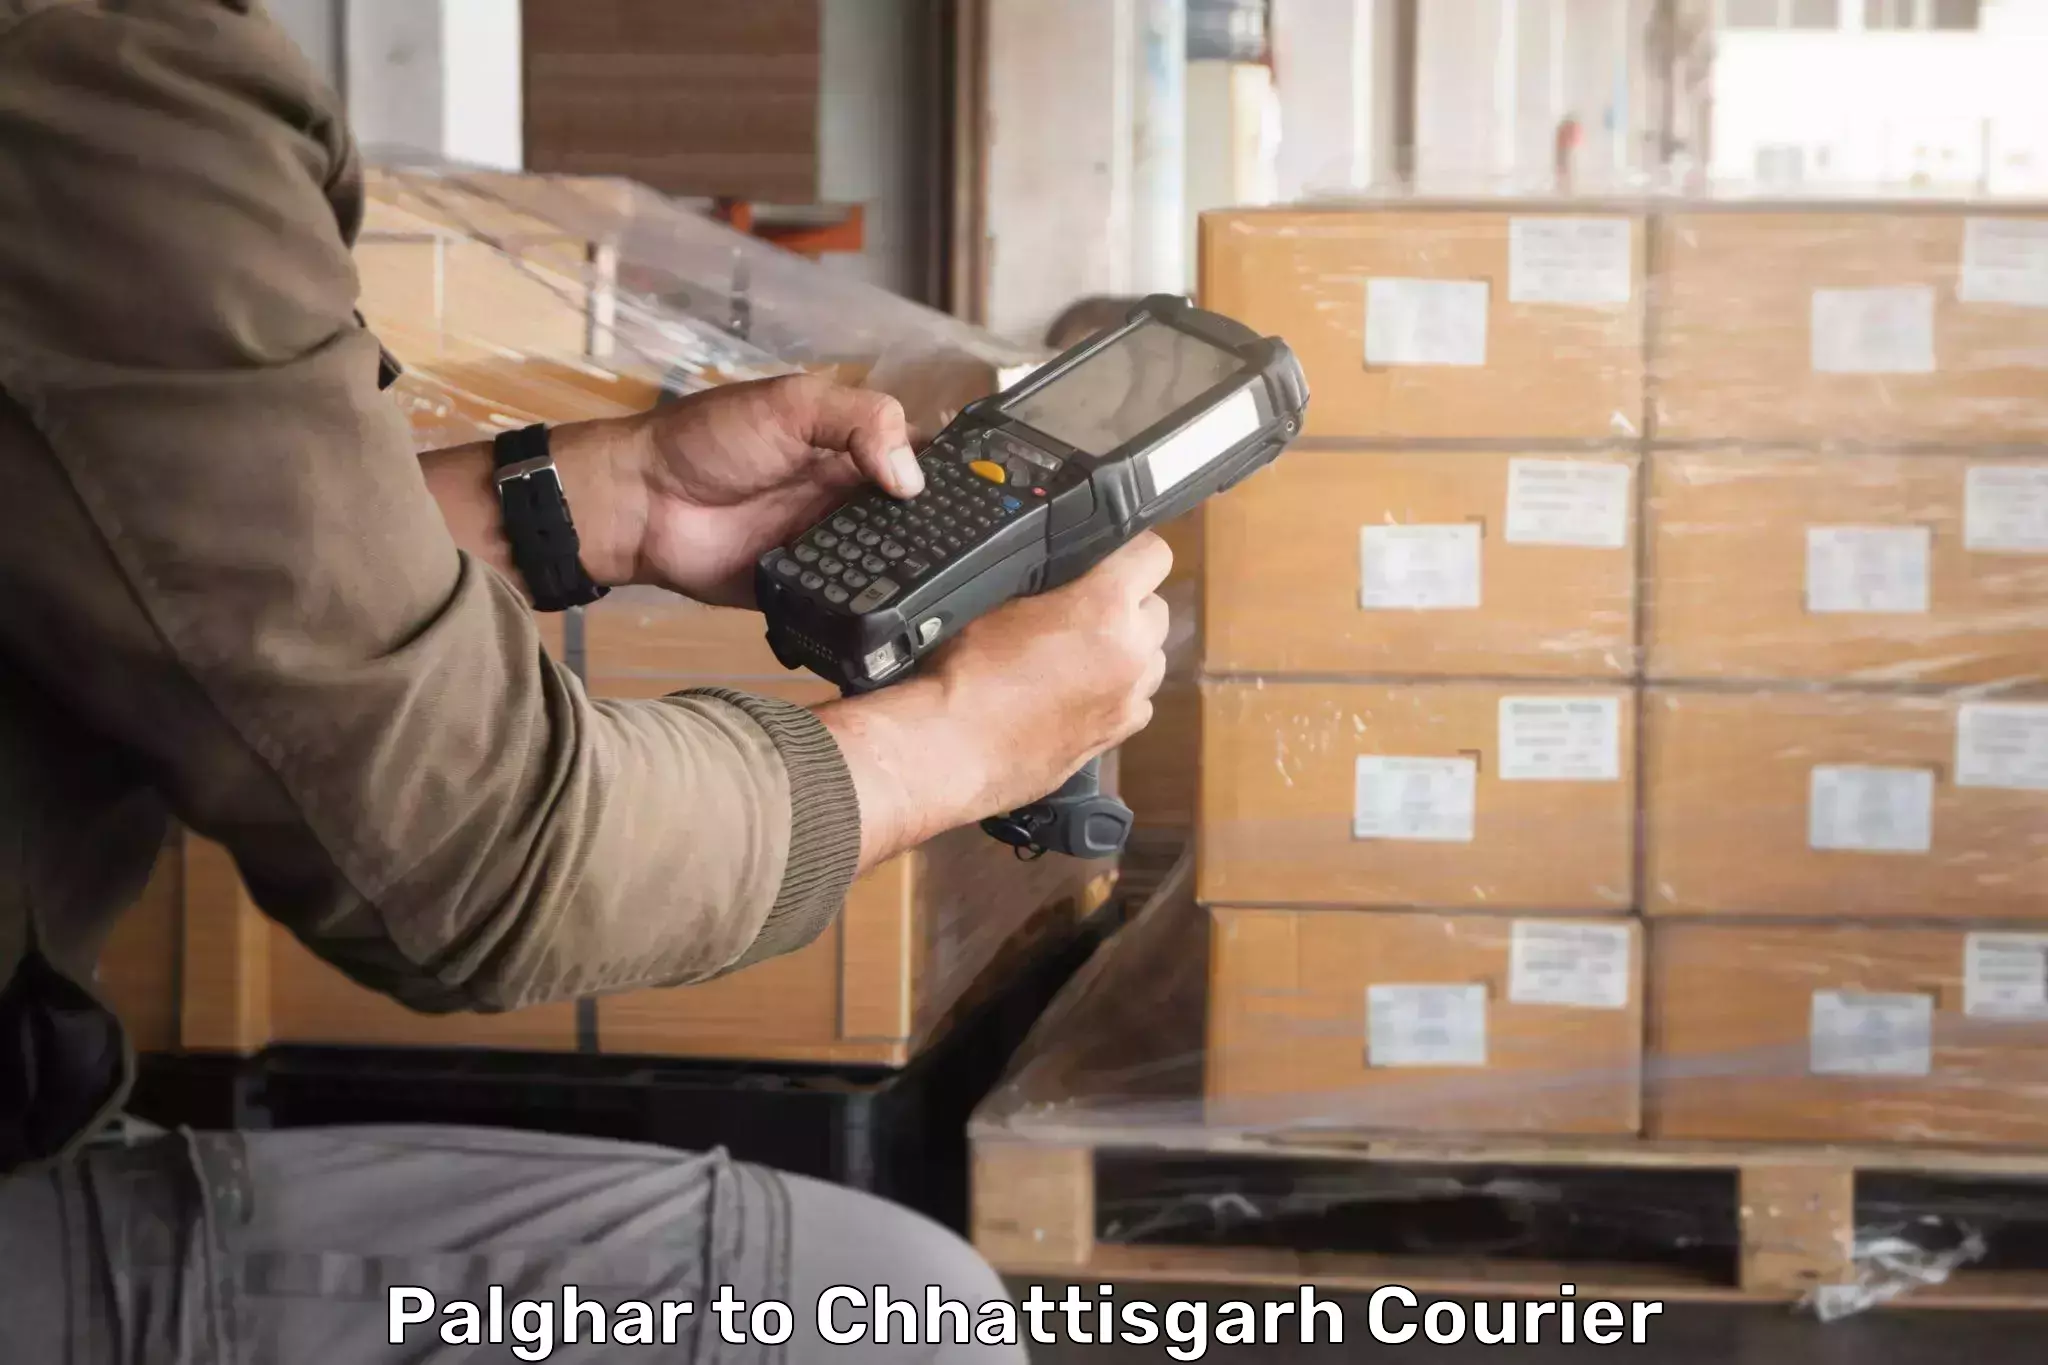 On-call courier service Palghar to Berla